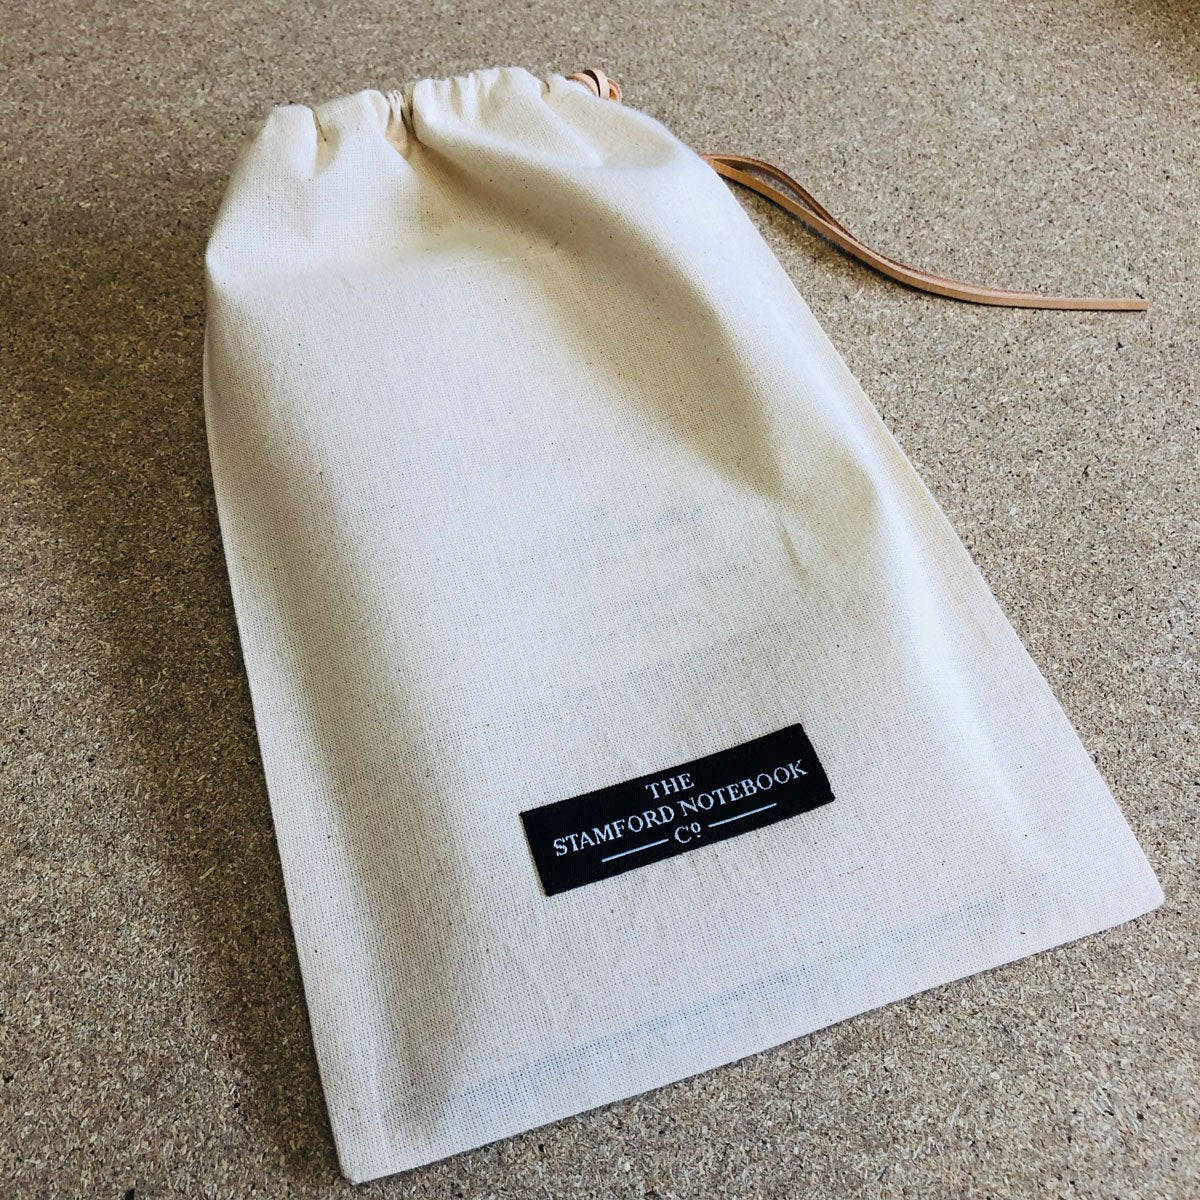 travellers journal in calico bag